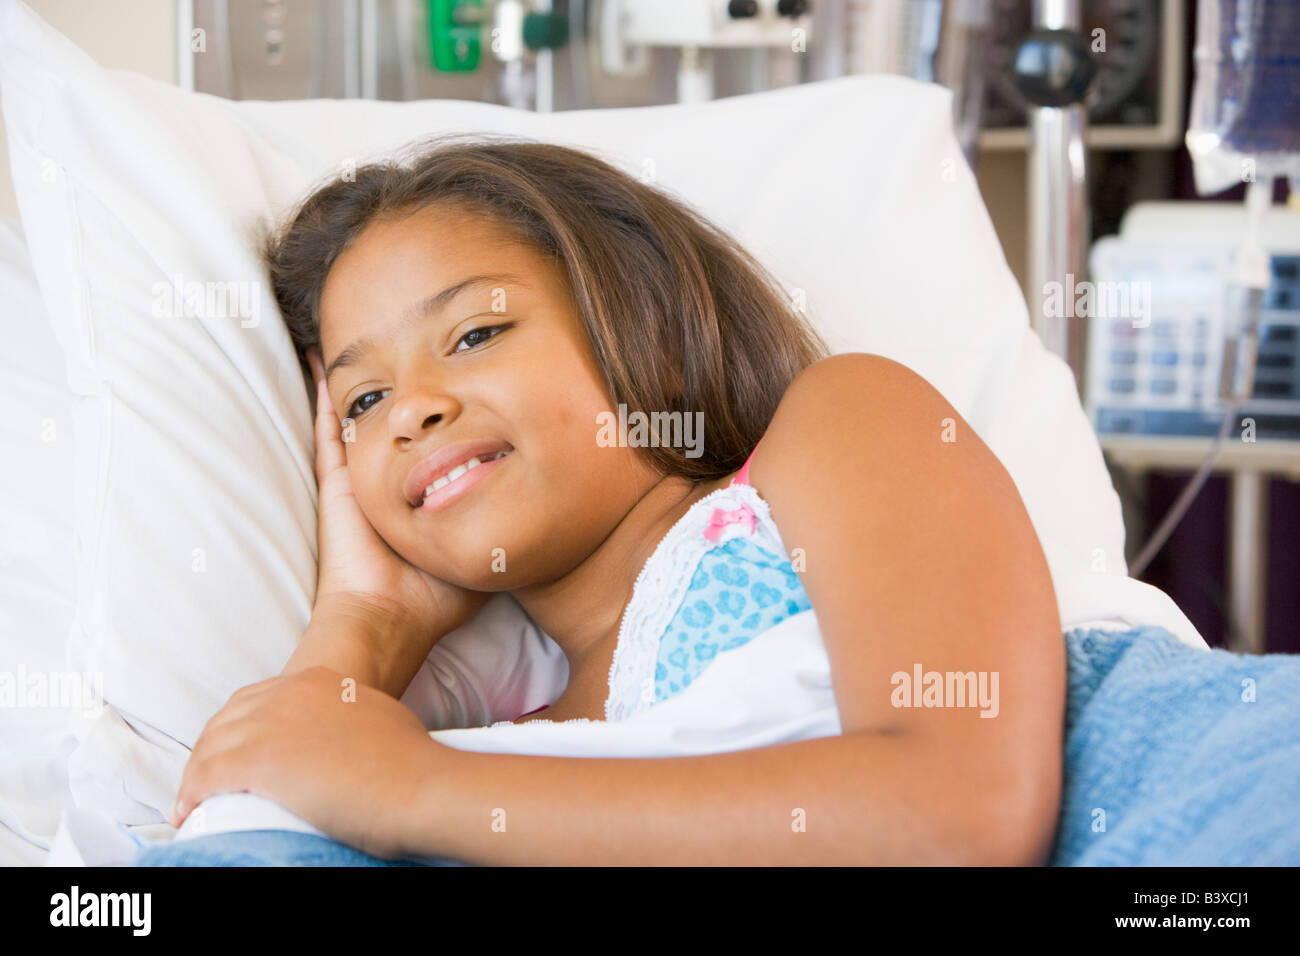 Young Girl Lying Down In Hospital Bed Stock Photo